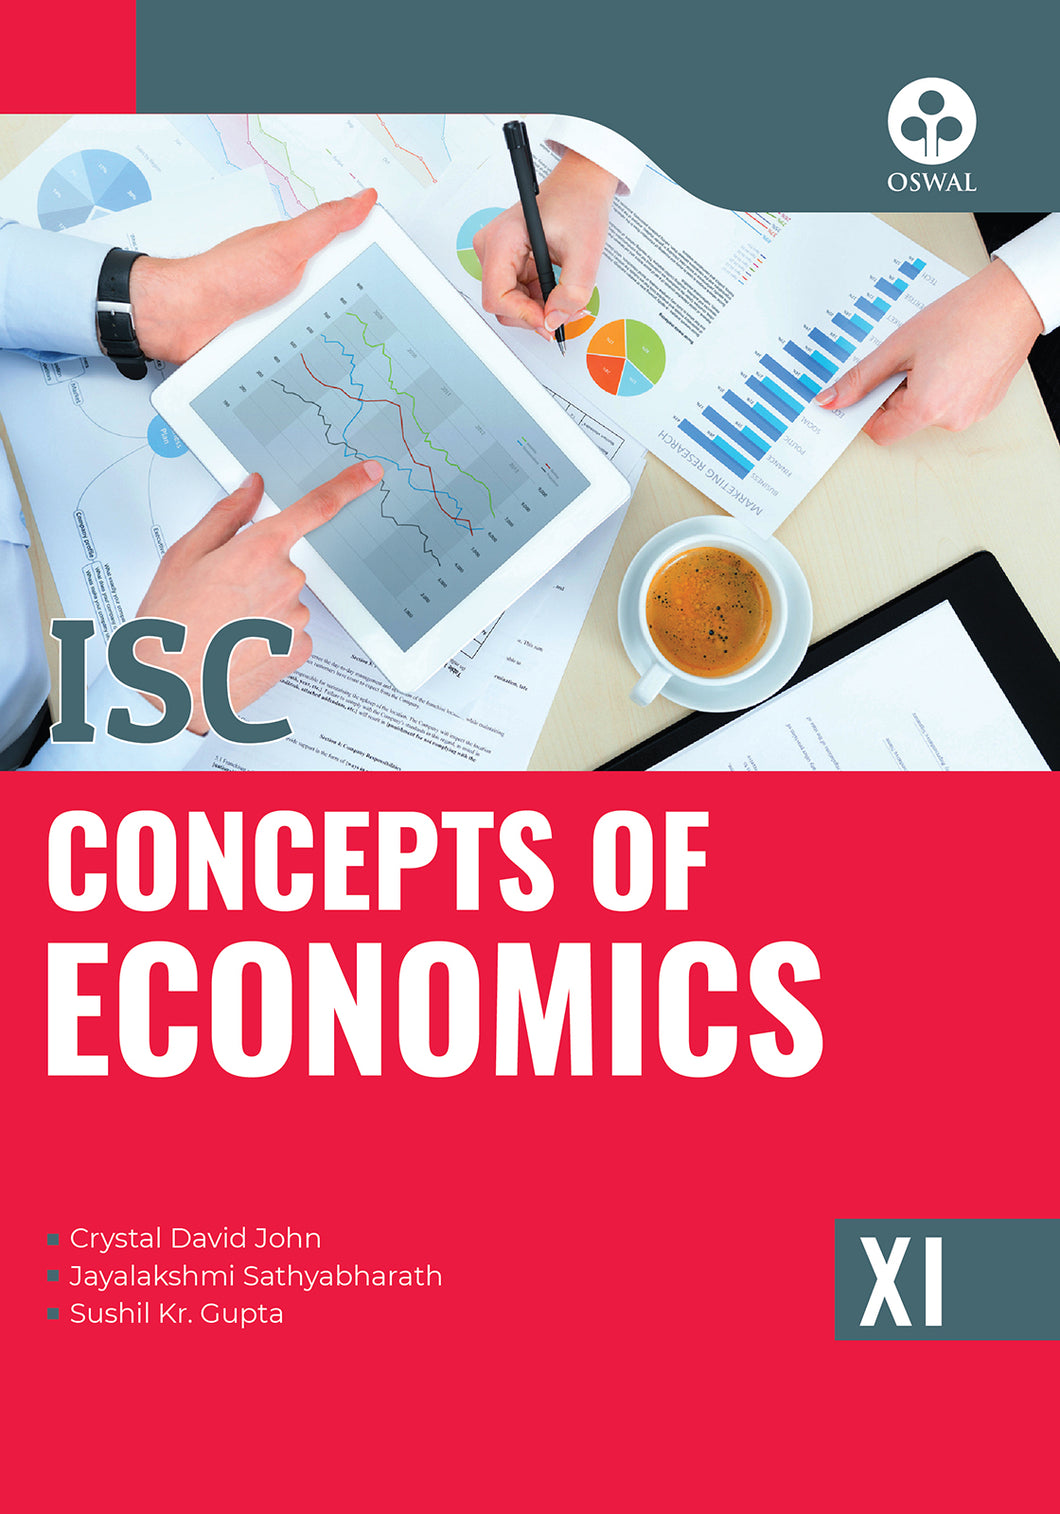 Oswal Concepts of Economics: Textbook for ISC Class 11